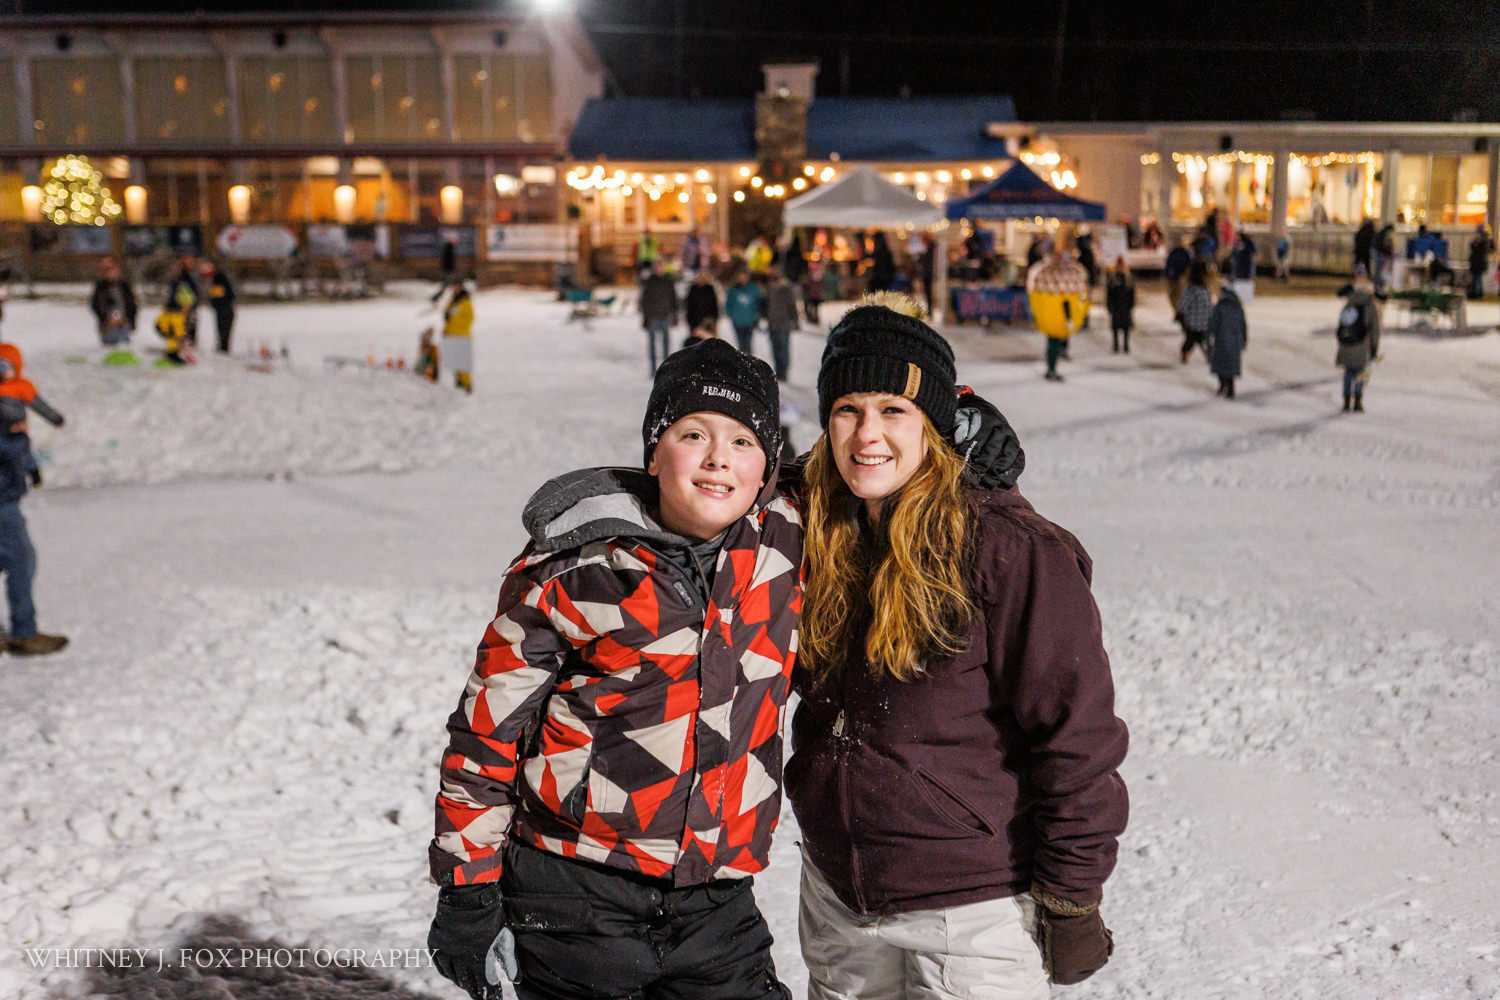 174 winter kids welcome to winter 2022 lost valley auburn maine documentary event photographer whitney j fox 3431 w